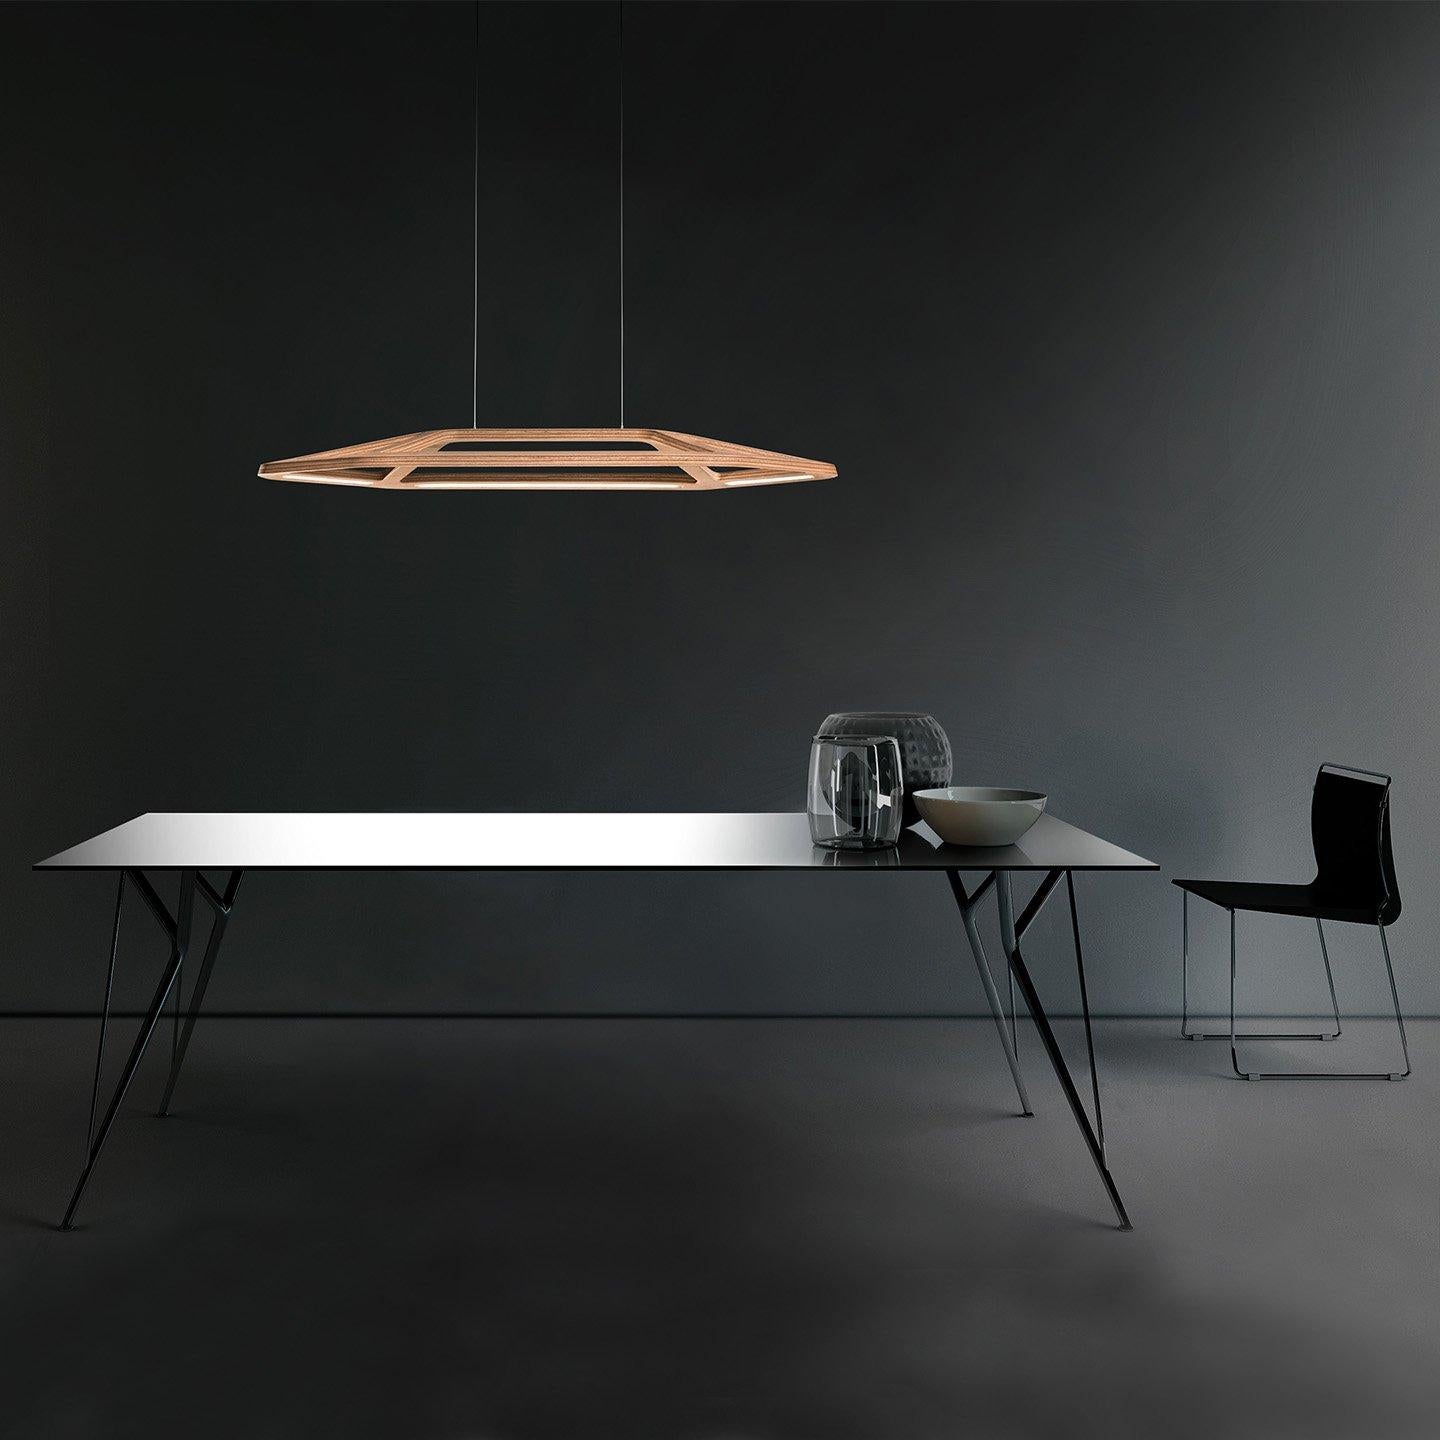 Aki, designed by Studio Dreimann in 2012, is a clever study of the use of new materials and forms. While Aki is a stunning presence, its leaf like form and solid okume wood frame is designed to be light beyond belief. Aki is constructed of solid